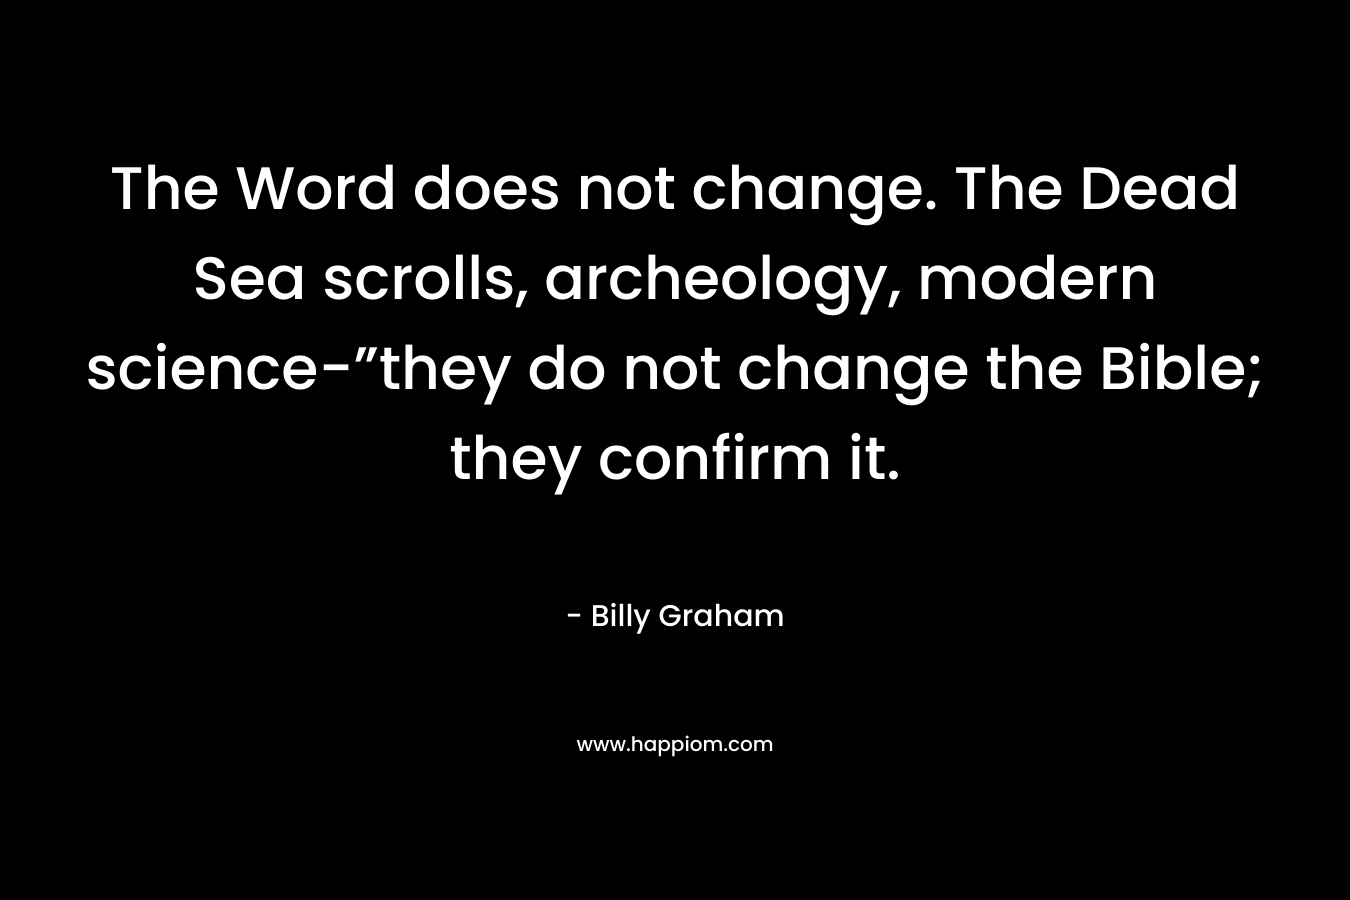 The Word does not change. The Dead Sea scrolls, archeology, modern science-”they do not change the Bible; they confirm it.